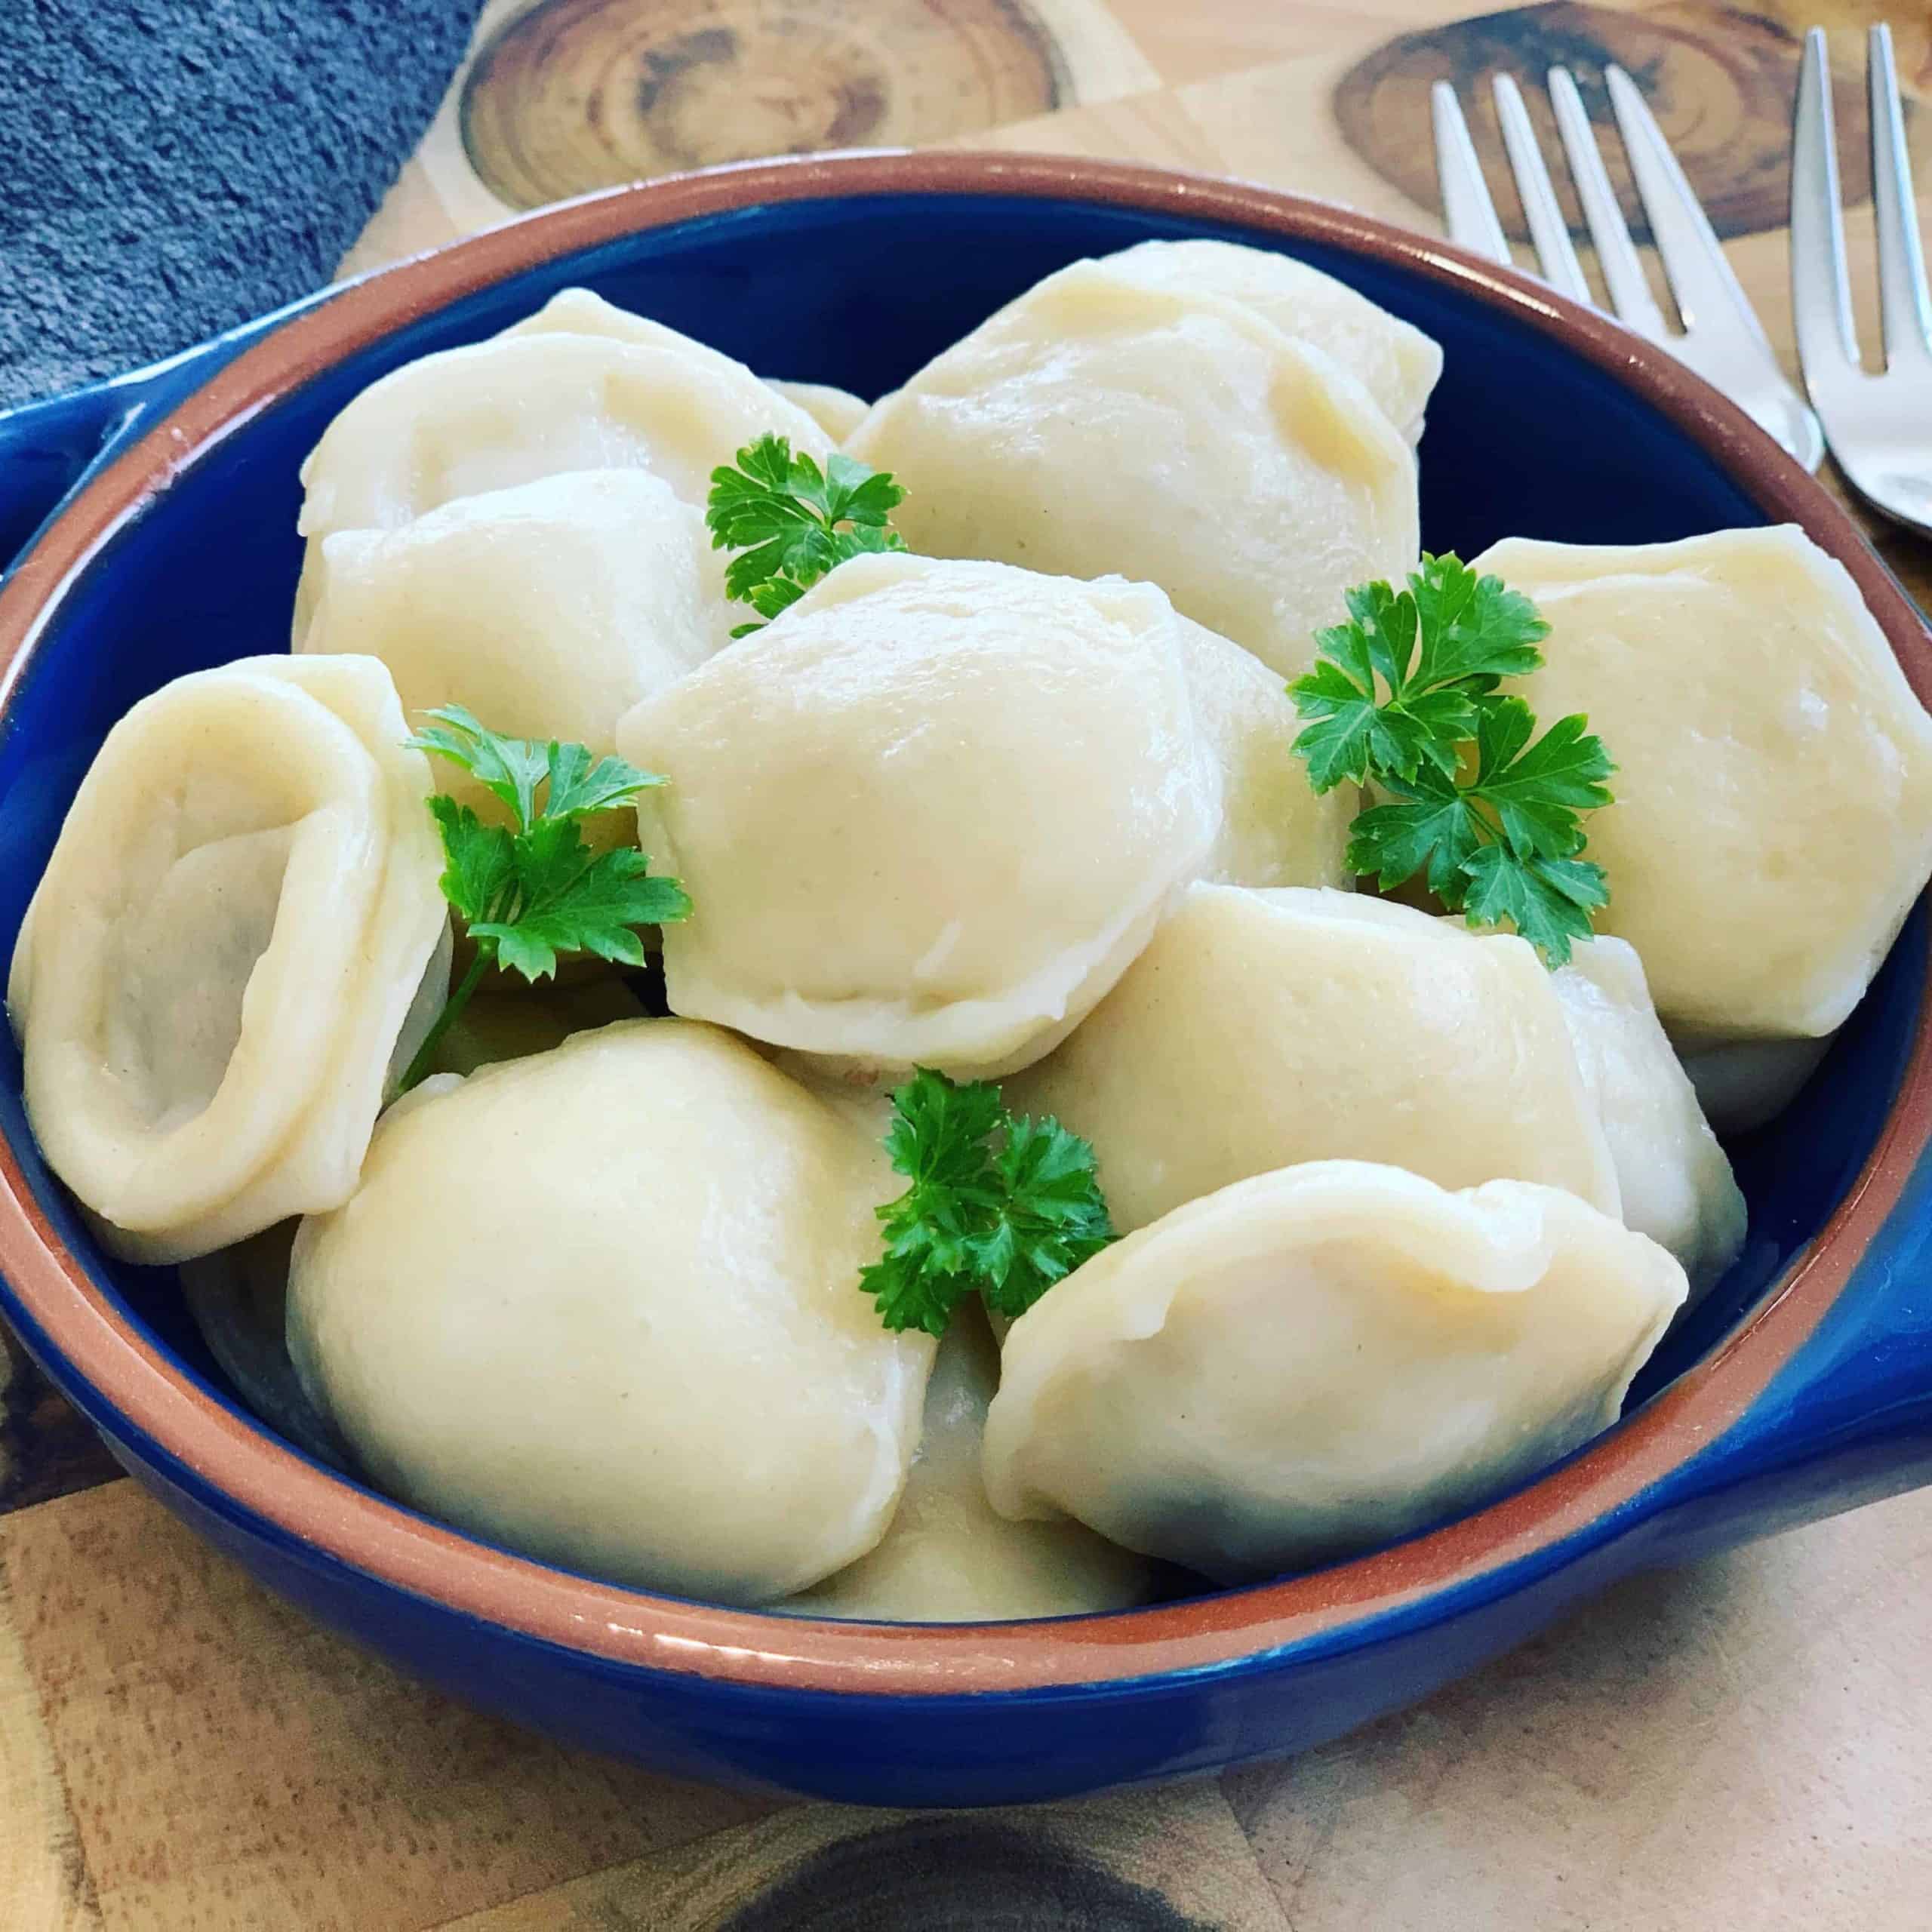 These Russian dumplings are so much quicker with this shortcut using a Pelmenitsa Mold! Filled with turkey meat and onion with an Asian twist - How to make Siberian Ravioli Pelmeni using a Mold